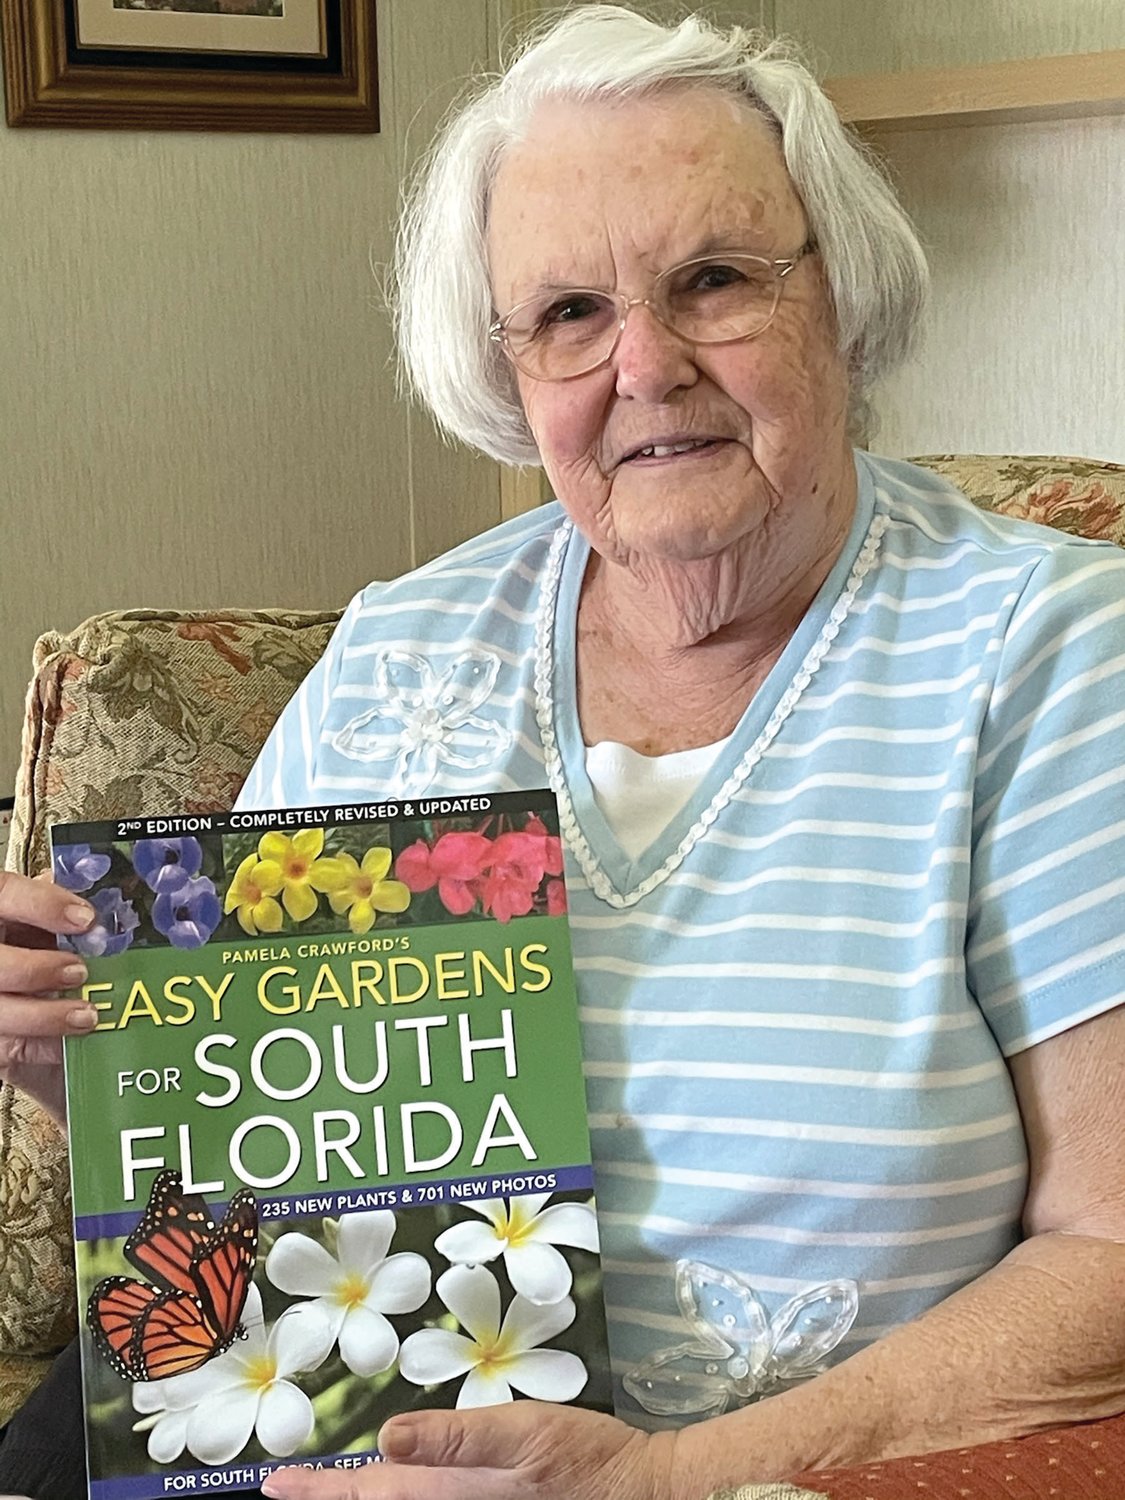 Ann Bowling with the book given as a loving tribute to her, Easy Gardens for South Florida.